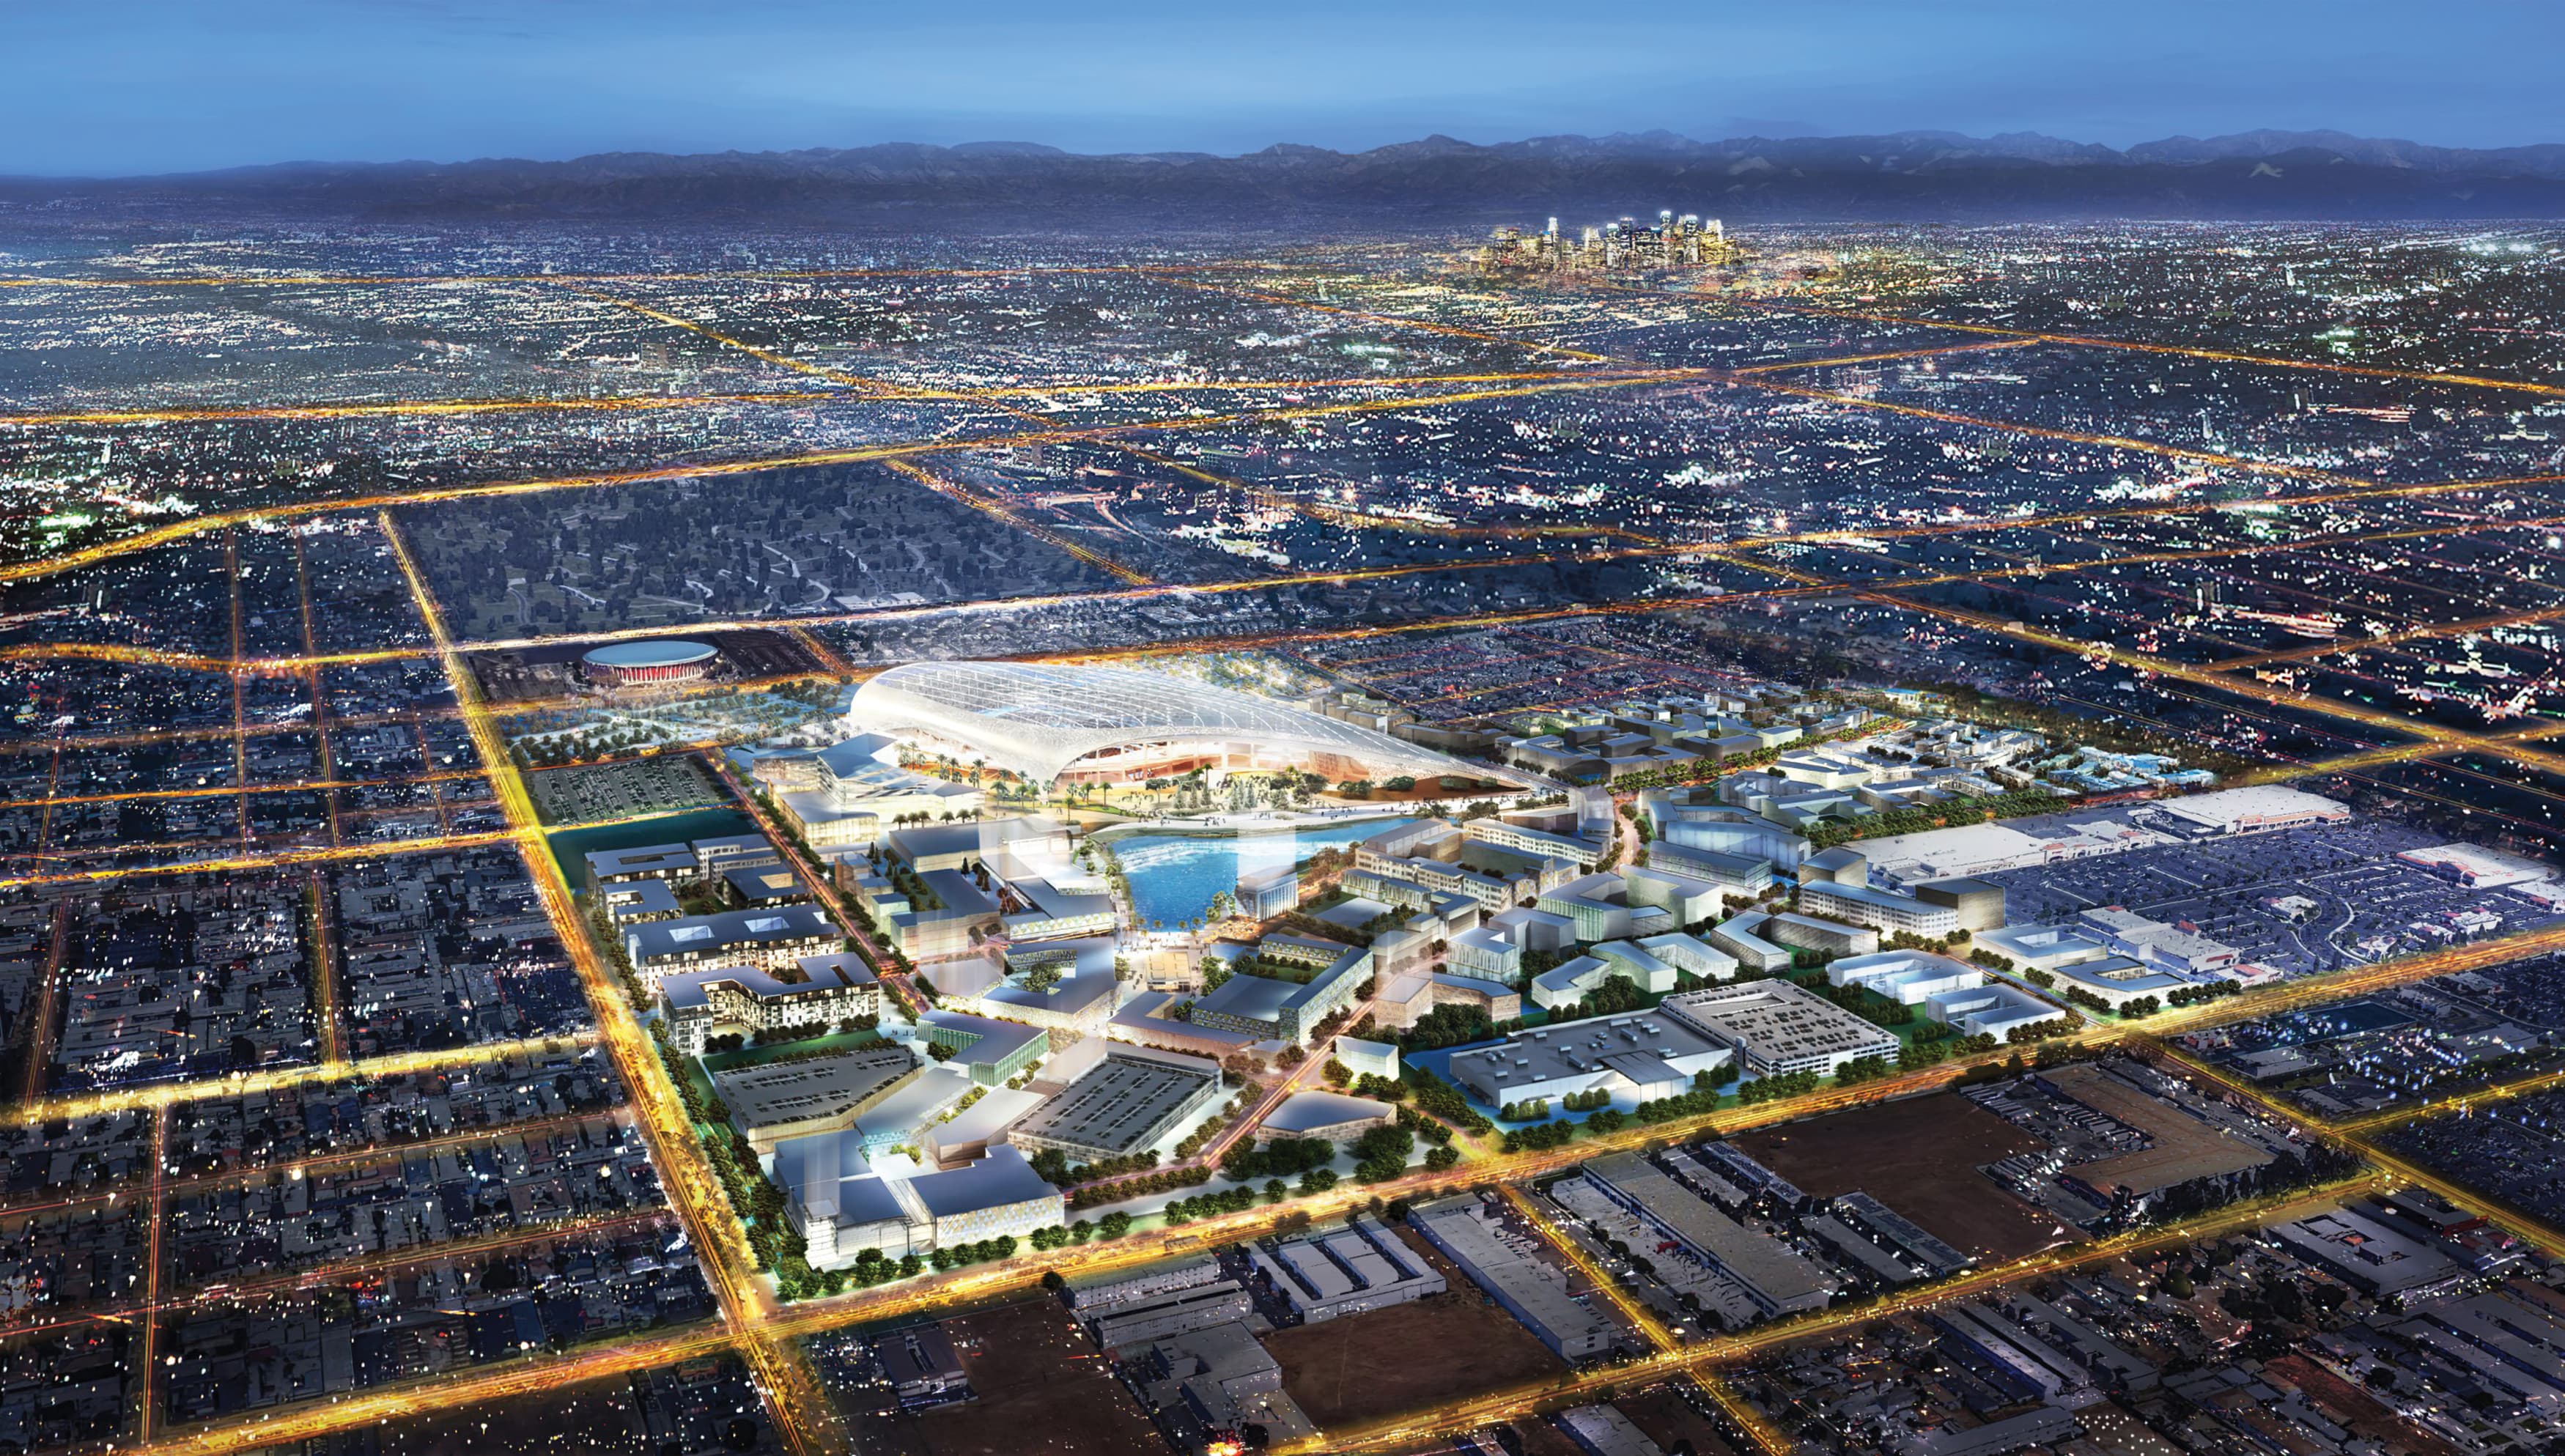 An aerial rendering of the Hollywood Park project, a mixed-use town center anchored by a 70,000 seat stadium.